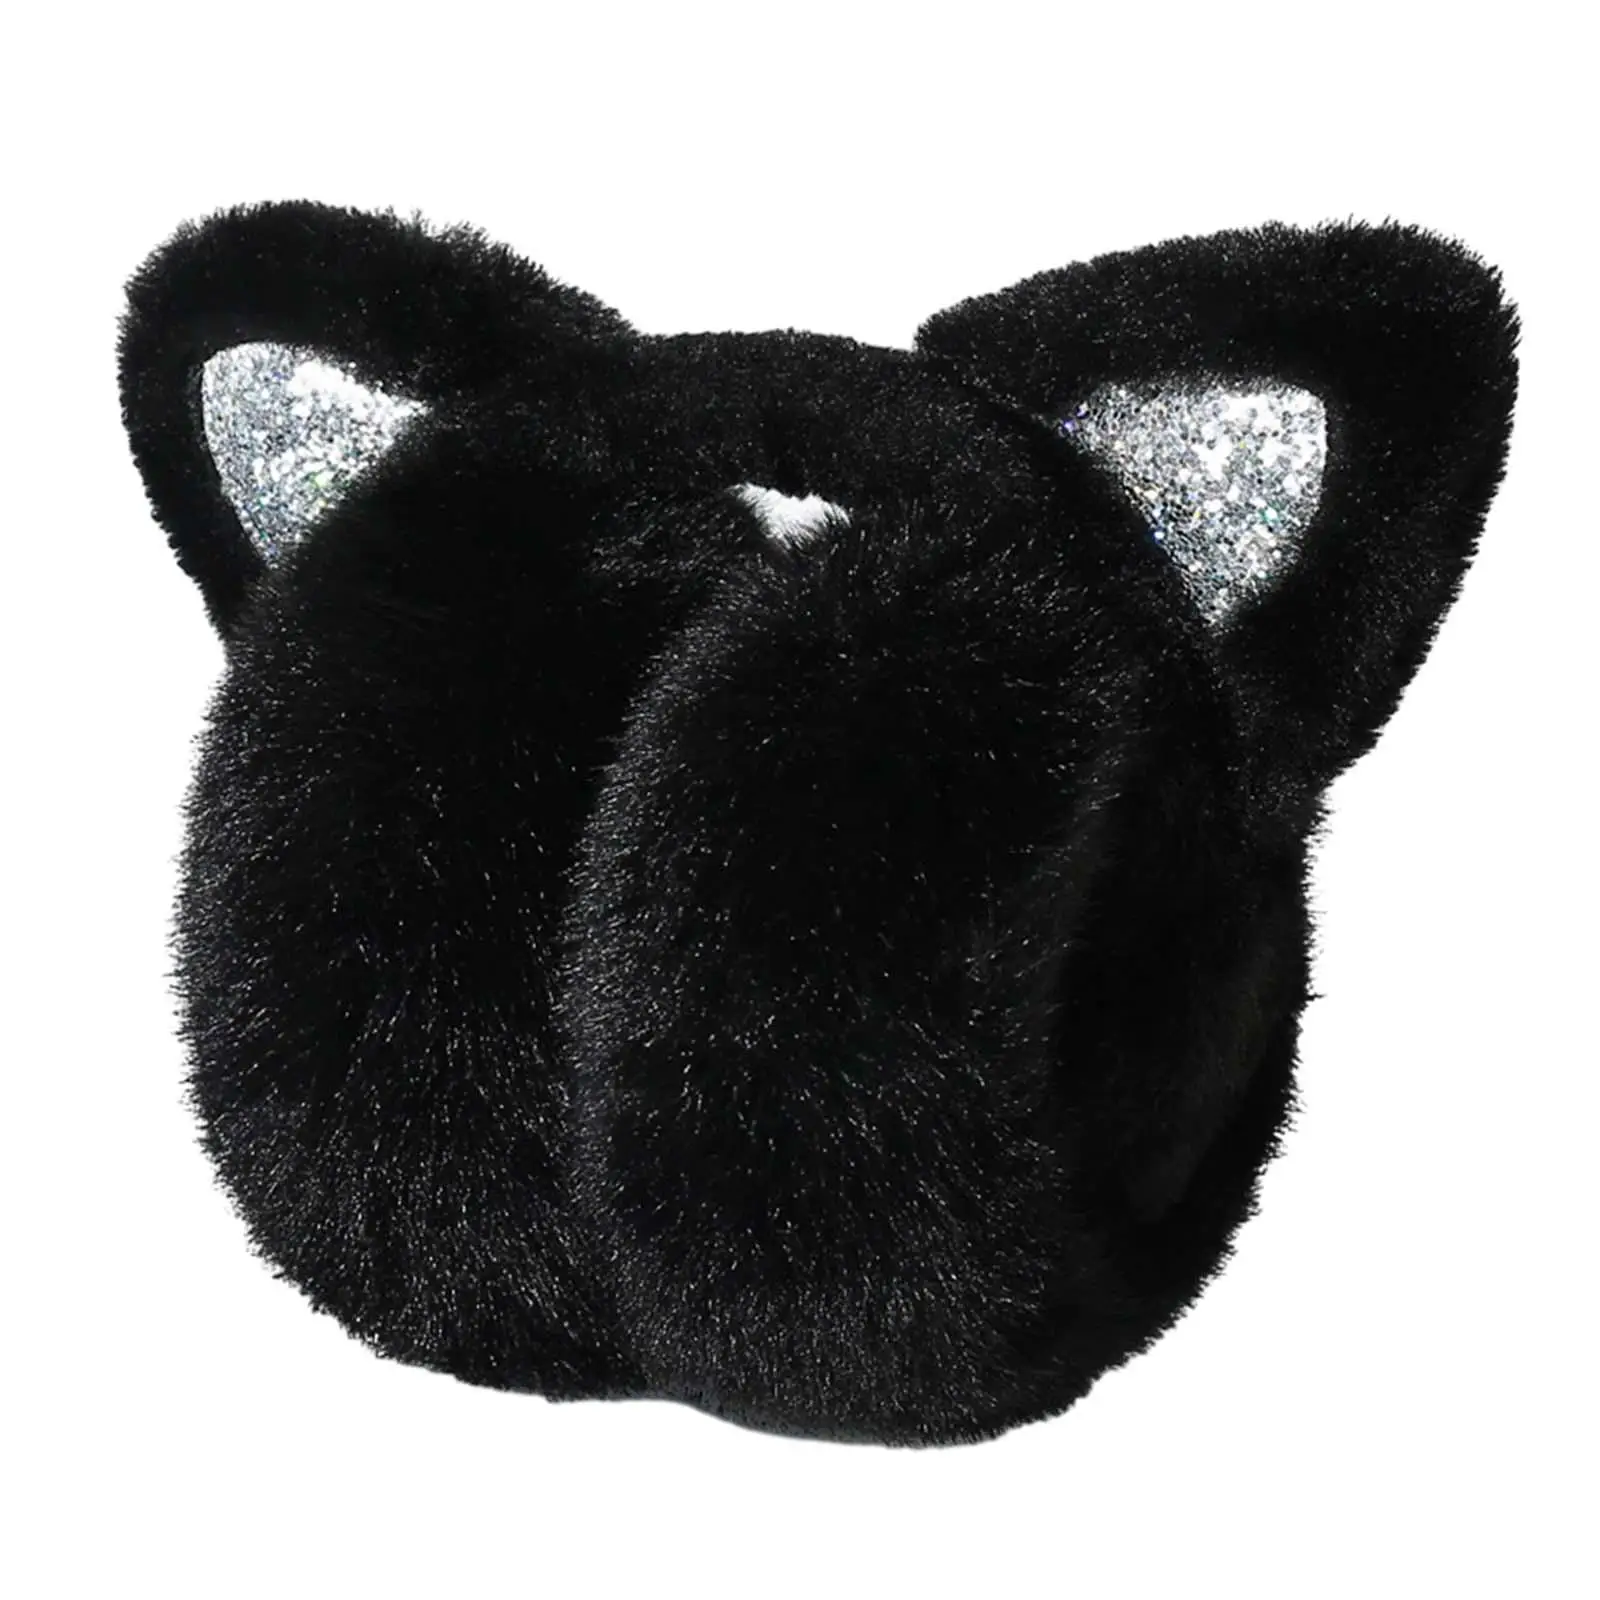 Earmuffs Soft Women Premium Foldable Ear Warmers Winter Ear Muffs Ear Cover for Outdoor Cycling Traveling Skating Cold Weather